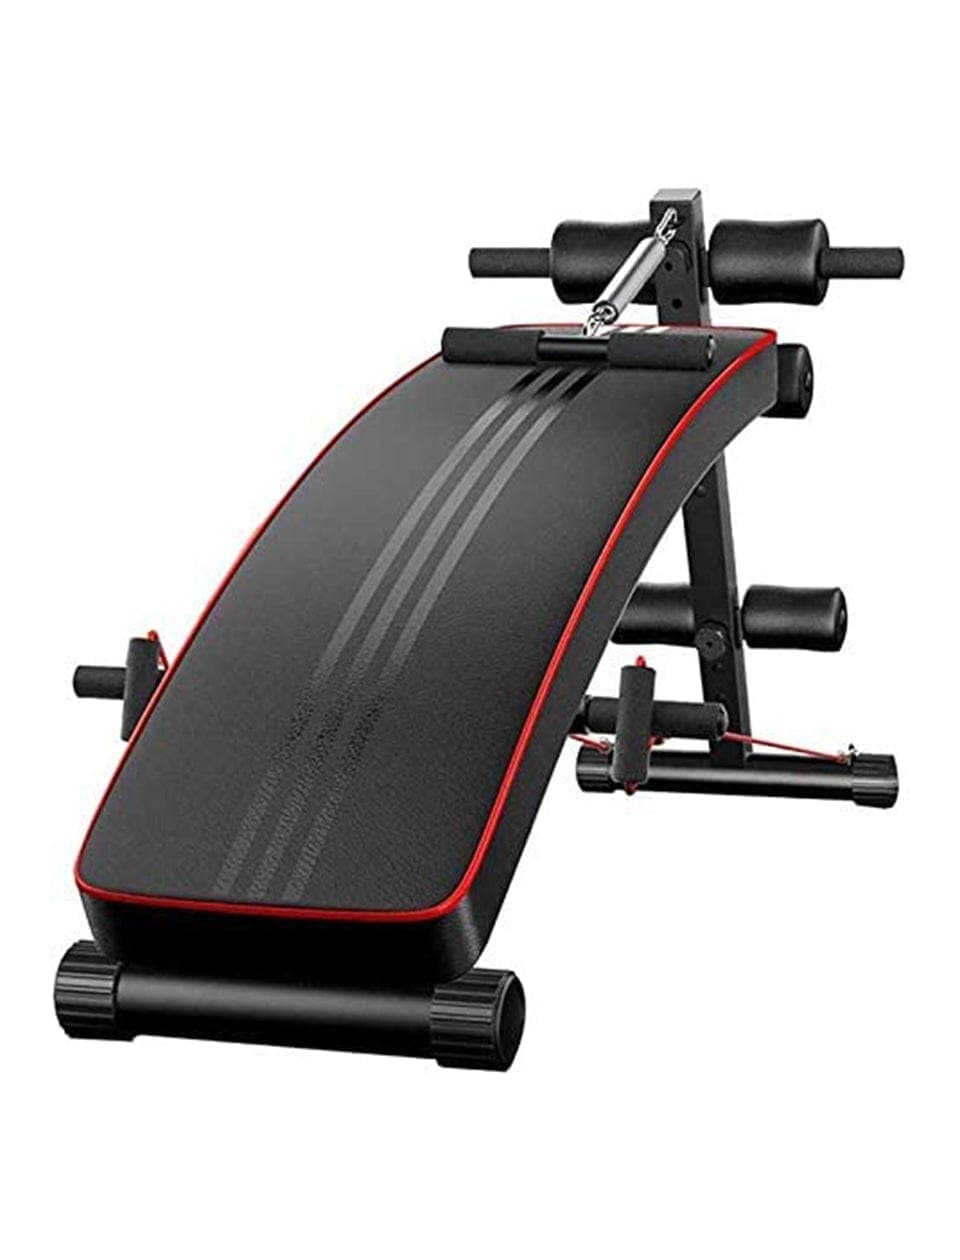 PRSAE Benches & Racks 1441 Fitness Decline Sit Up Bench with Reverse Crunch Handle -B006